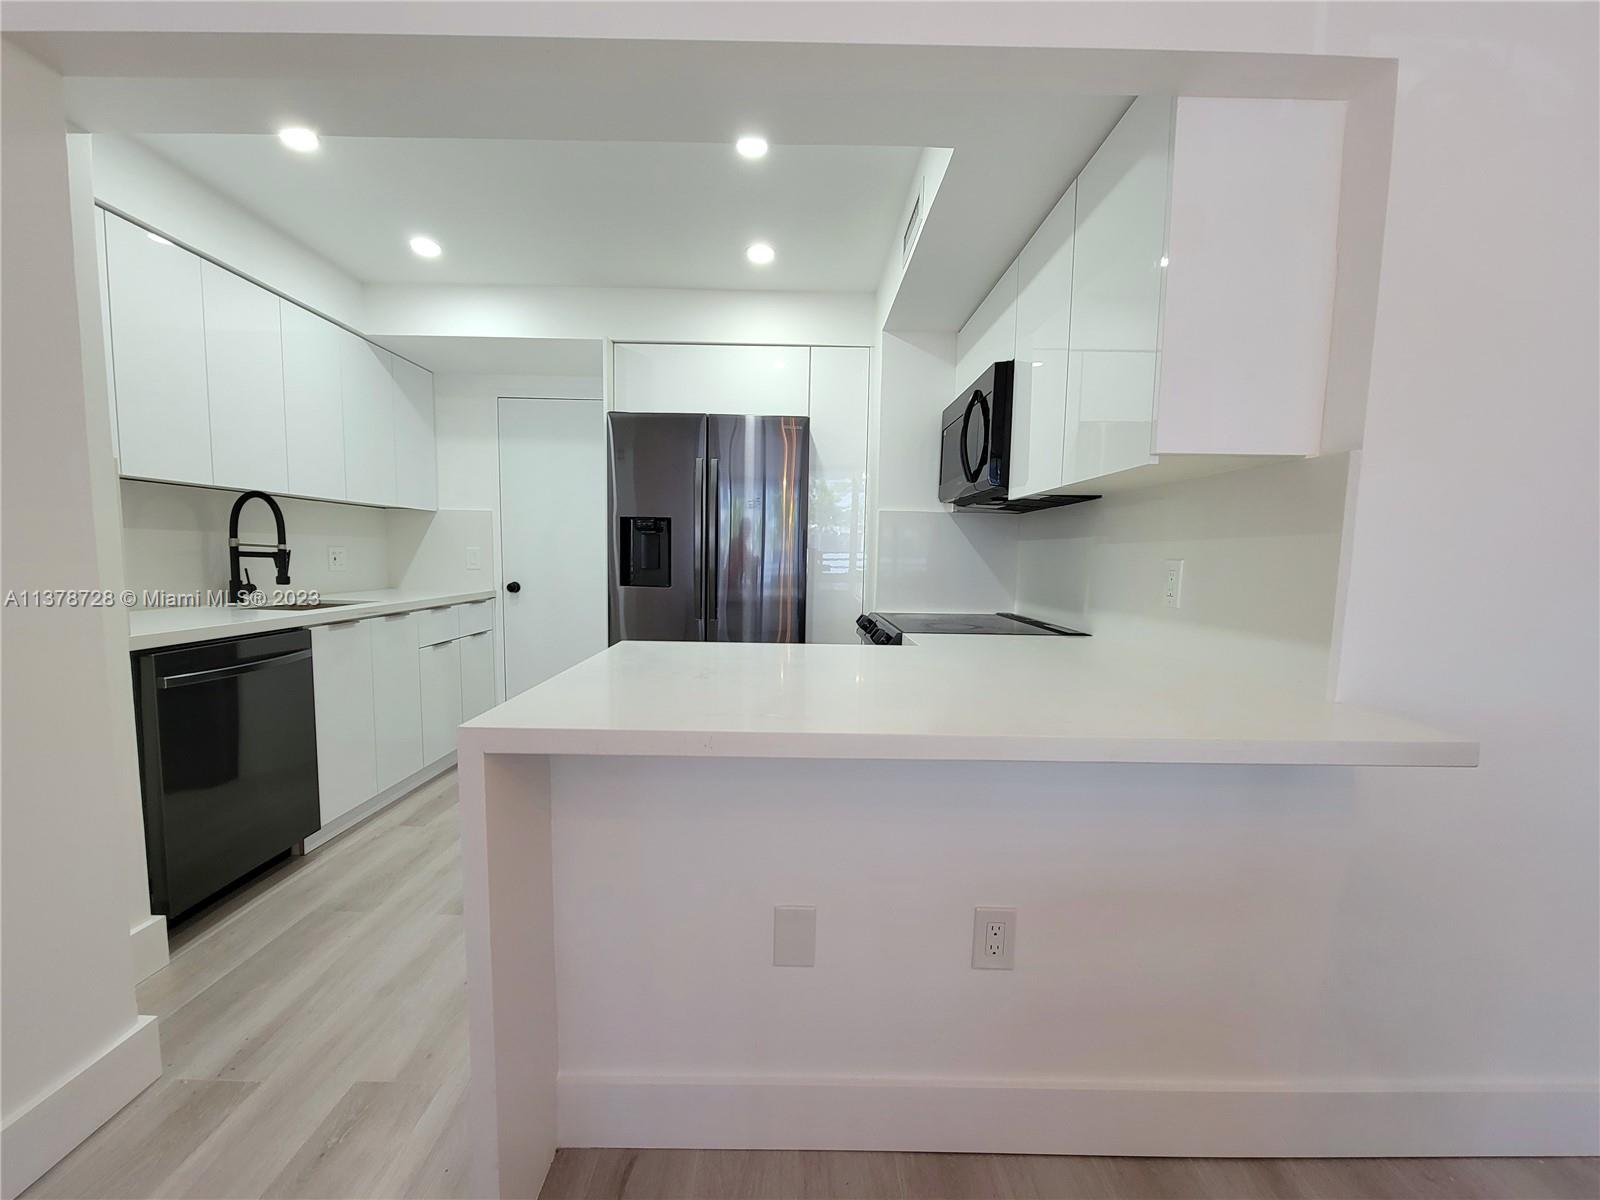 Gloss White Cabinets